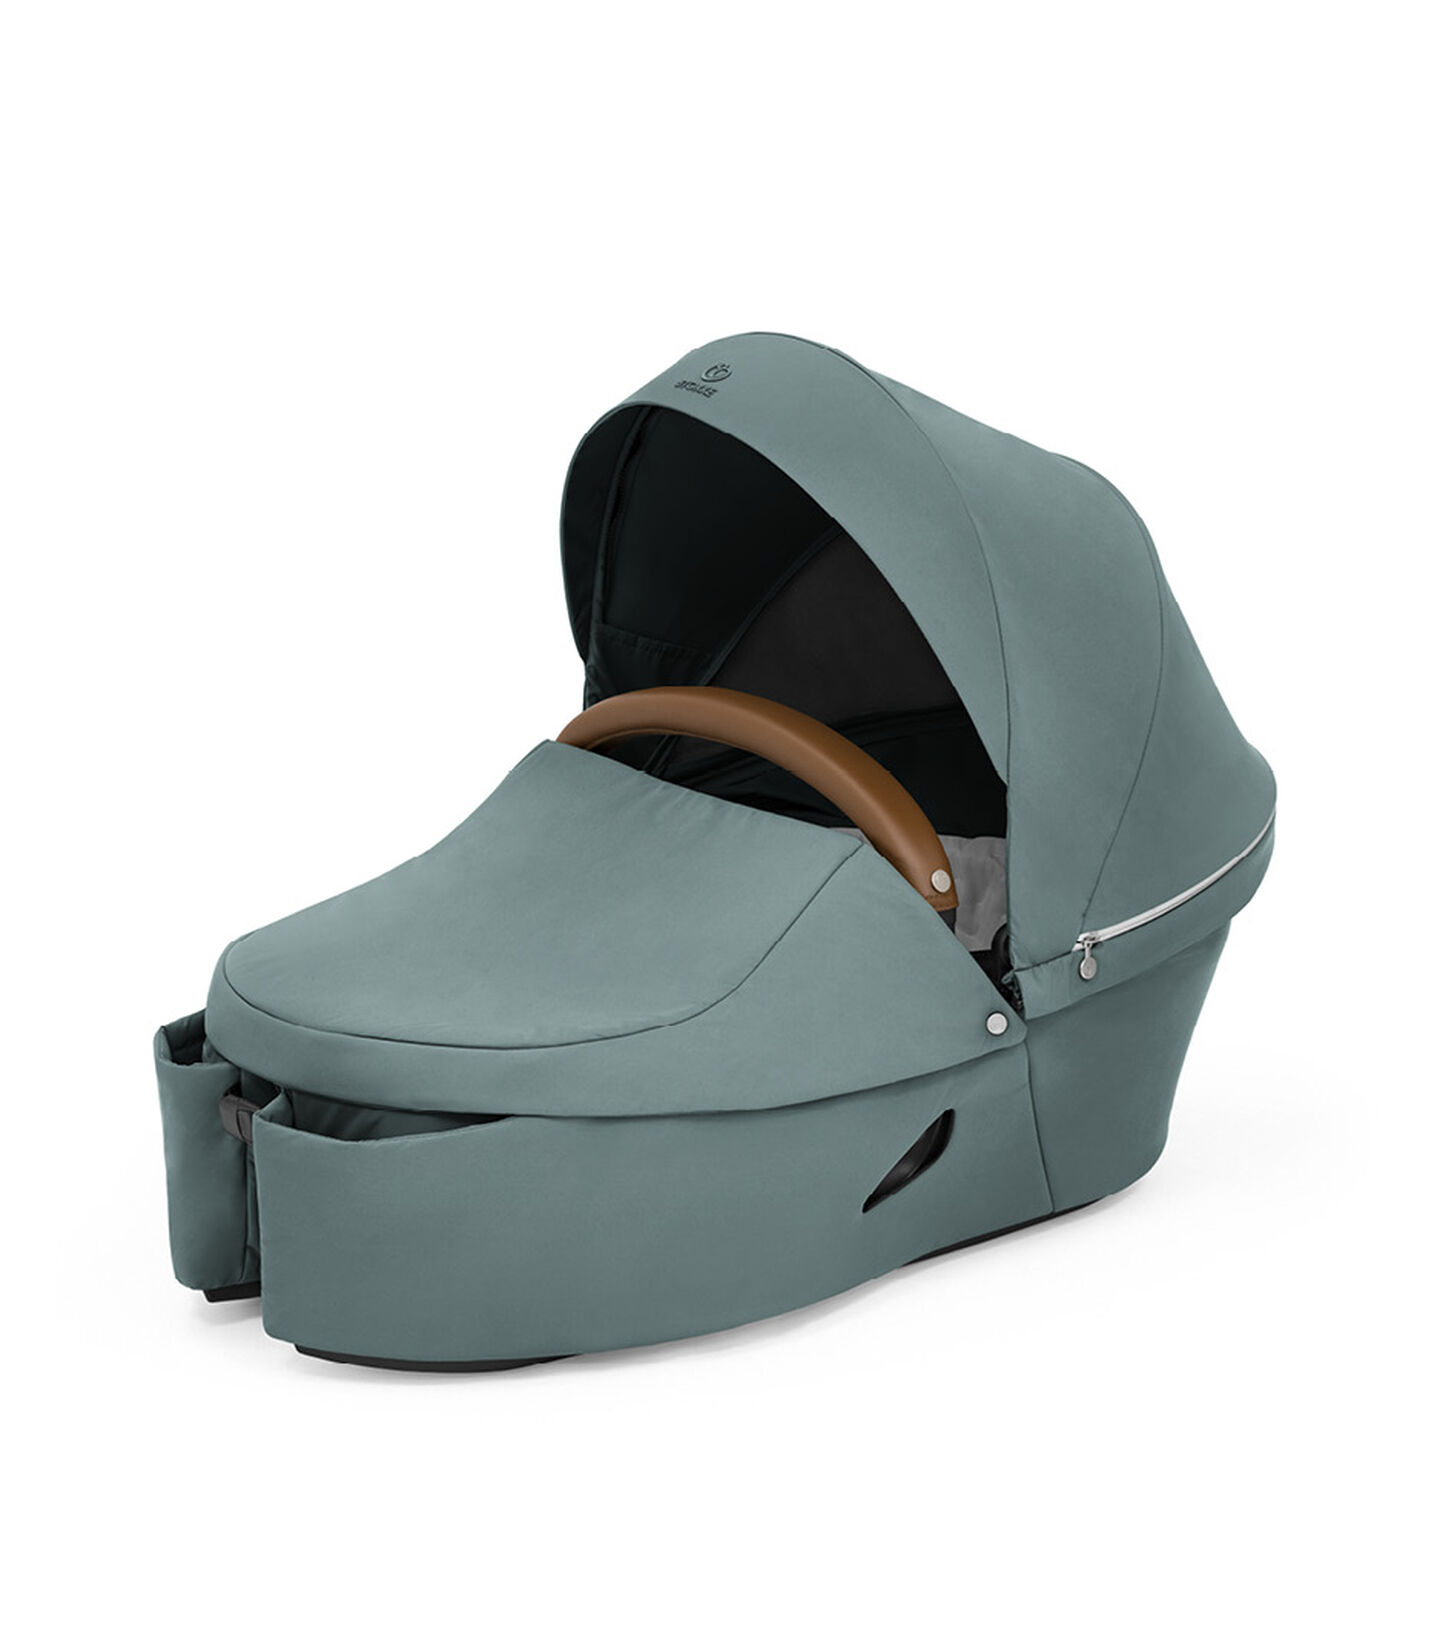 Stokke® Xplory® X Babyschale Cool Teal, Cool Teal, mainview view 5